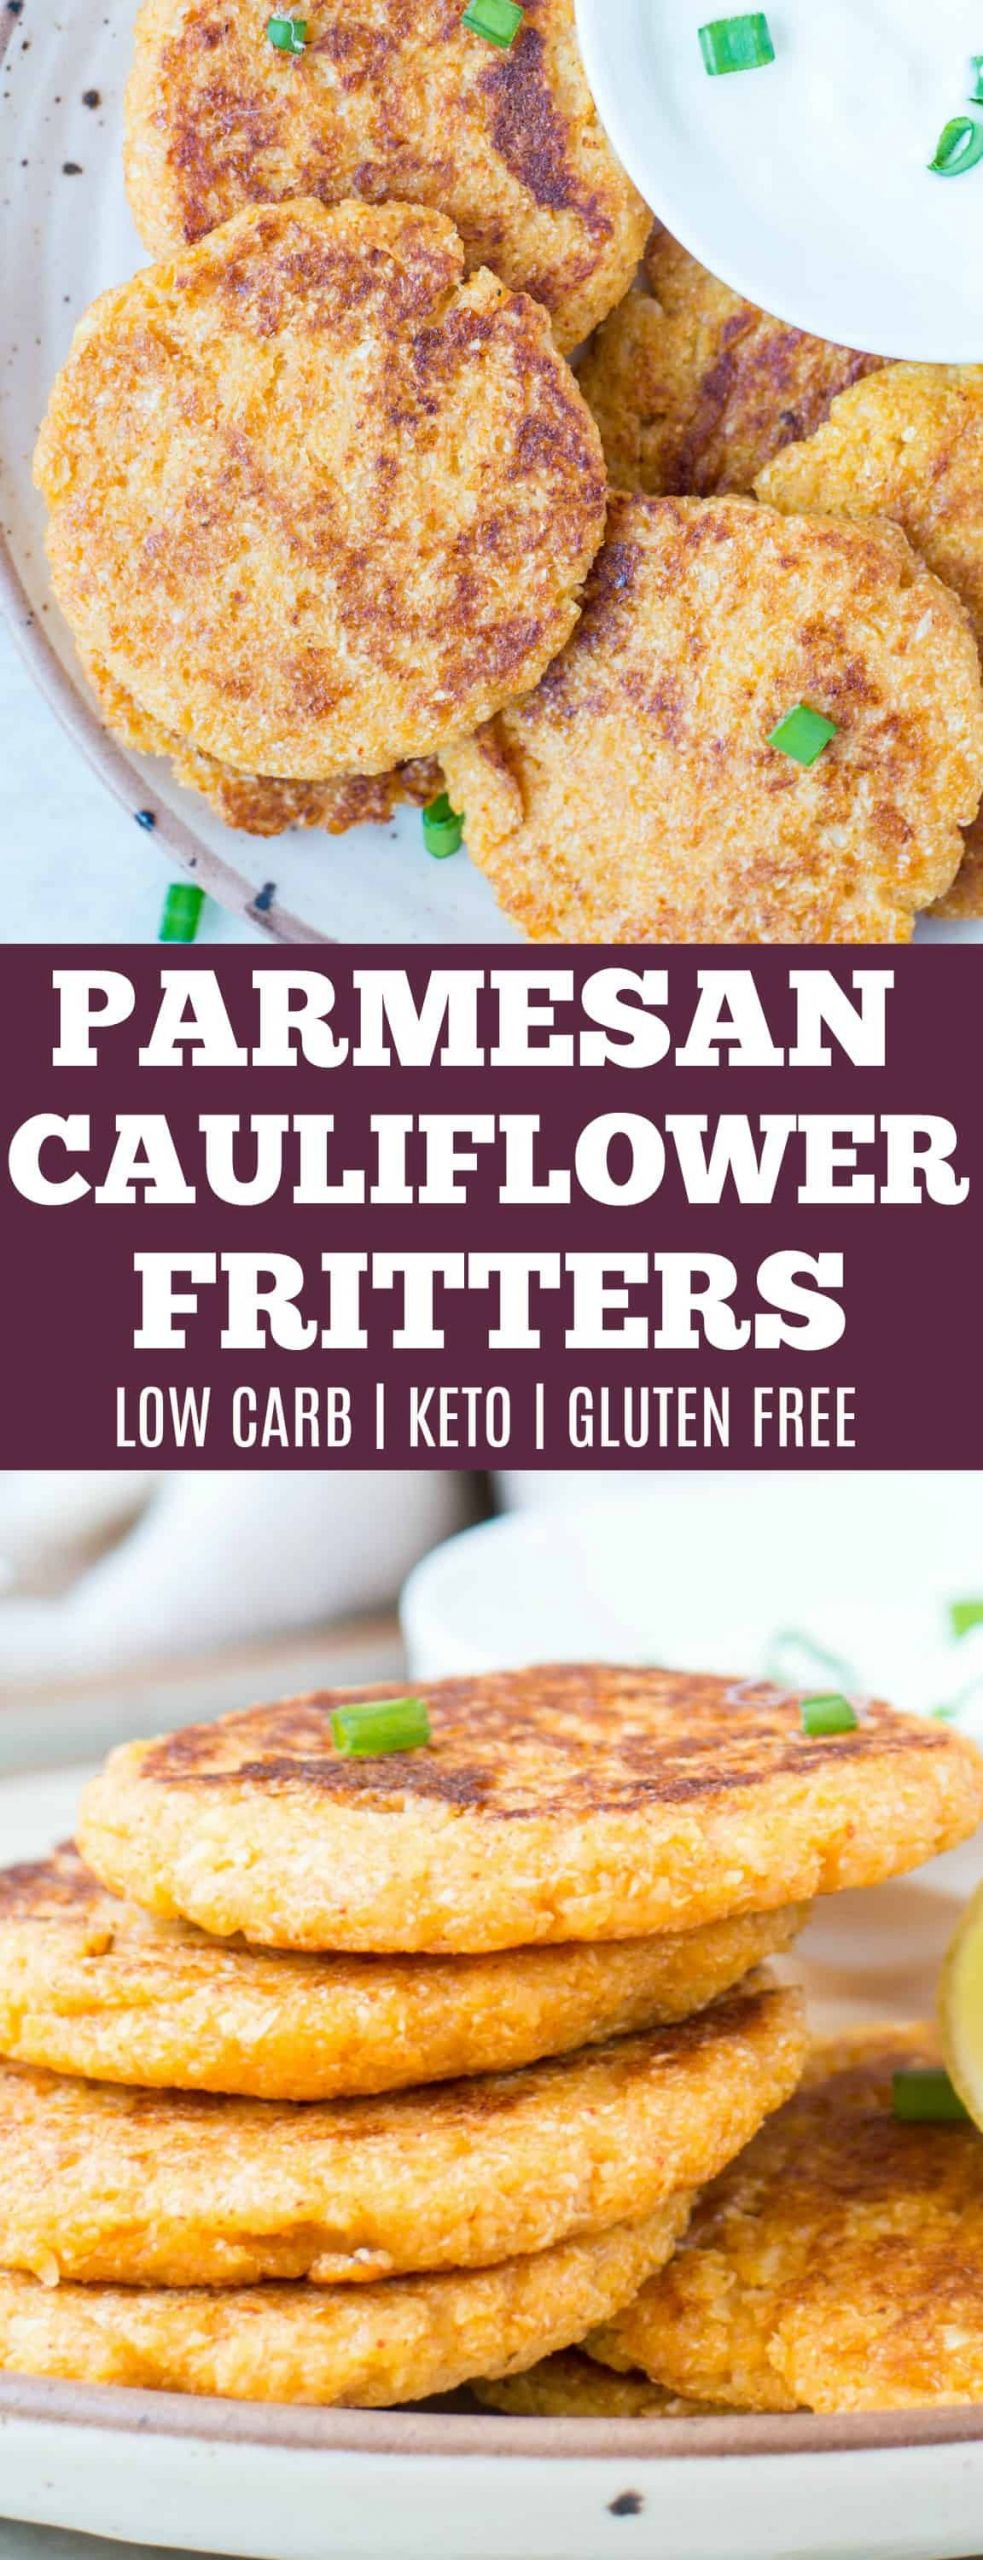 Cauliflower Keto Fritters
 PARMESAN CAULIFLOWER FRITTERS LOW CARB KETO The